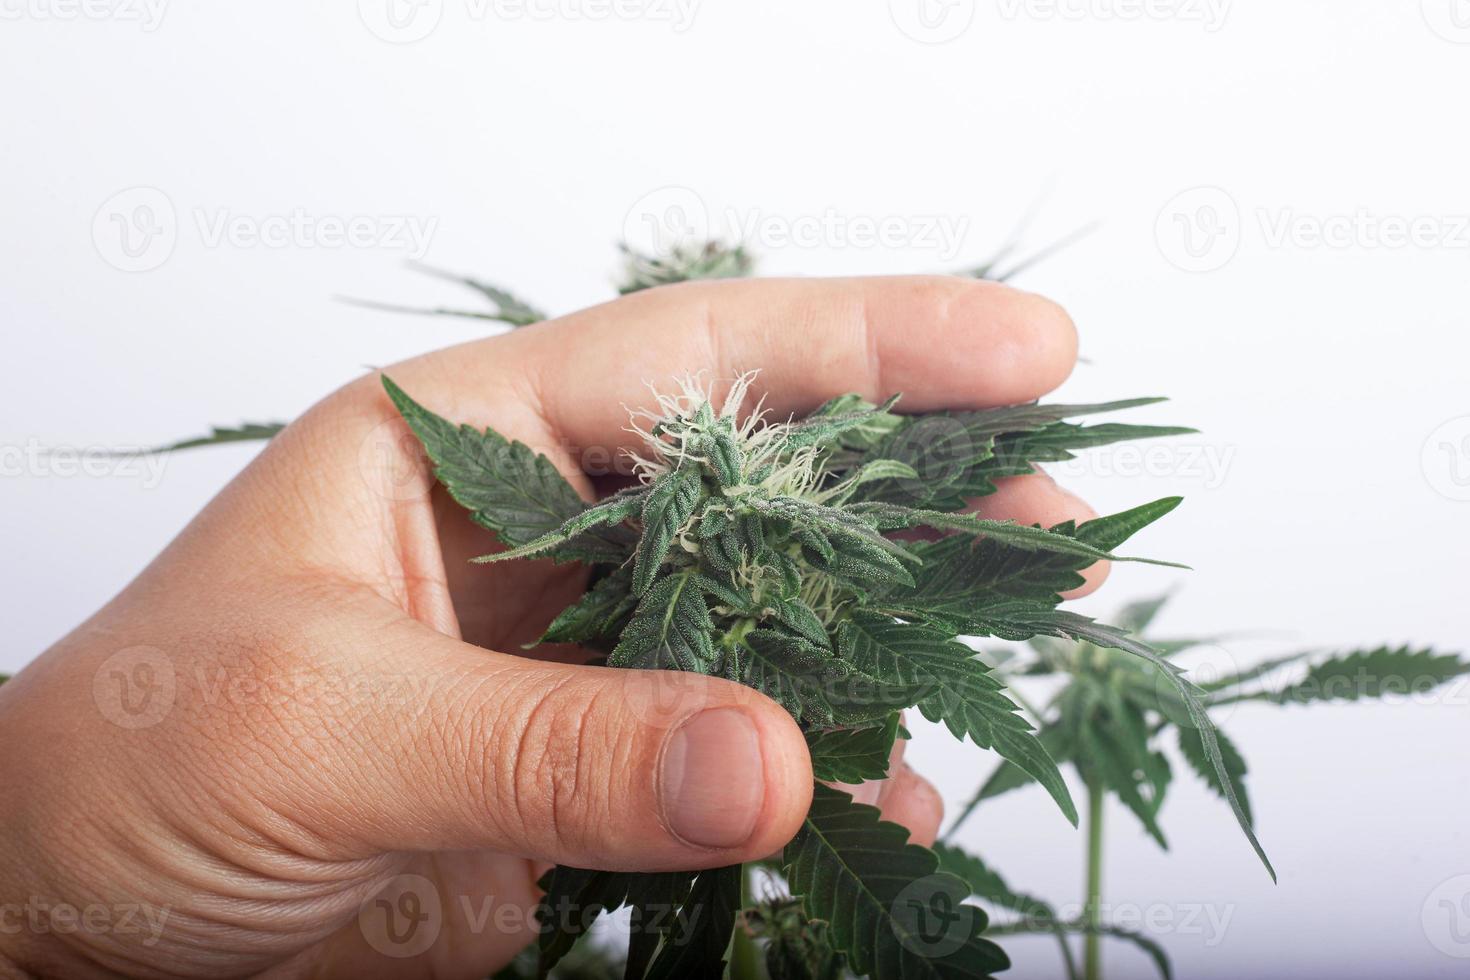 A grower holds a cannabis bud while checking for mold photo